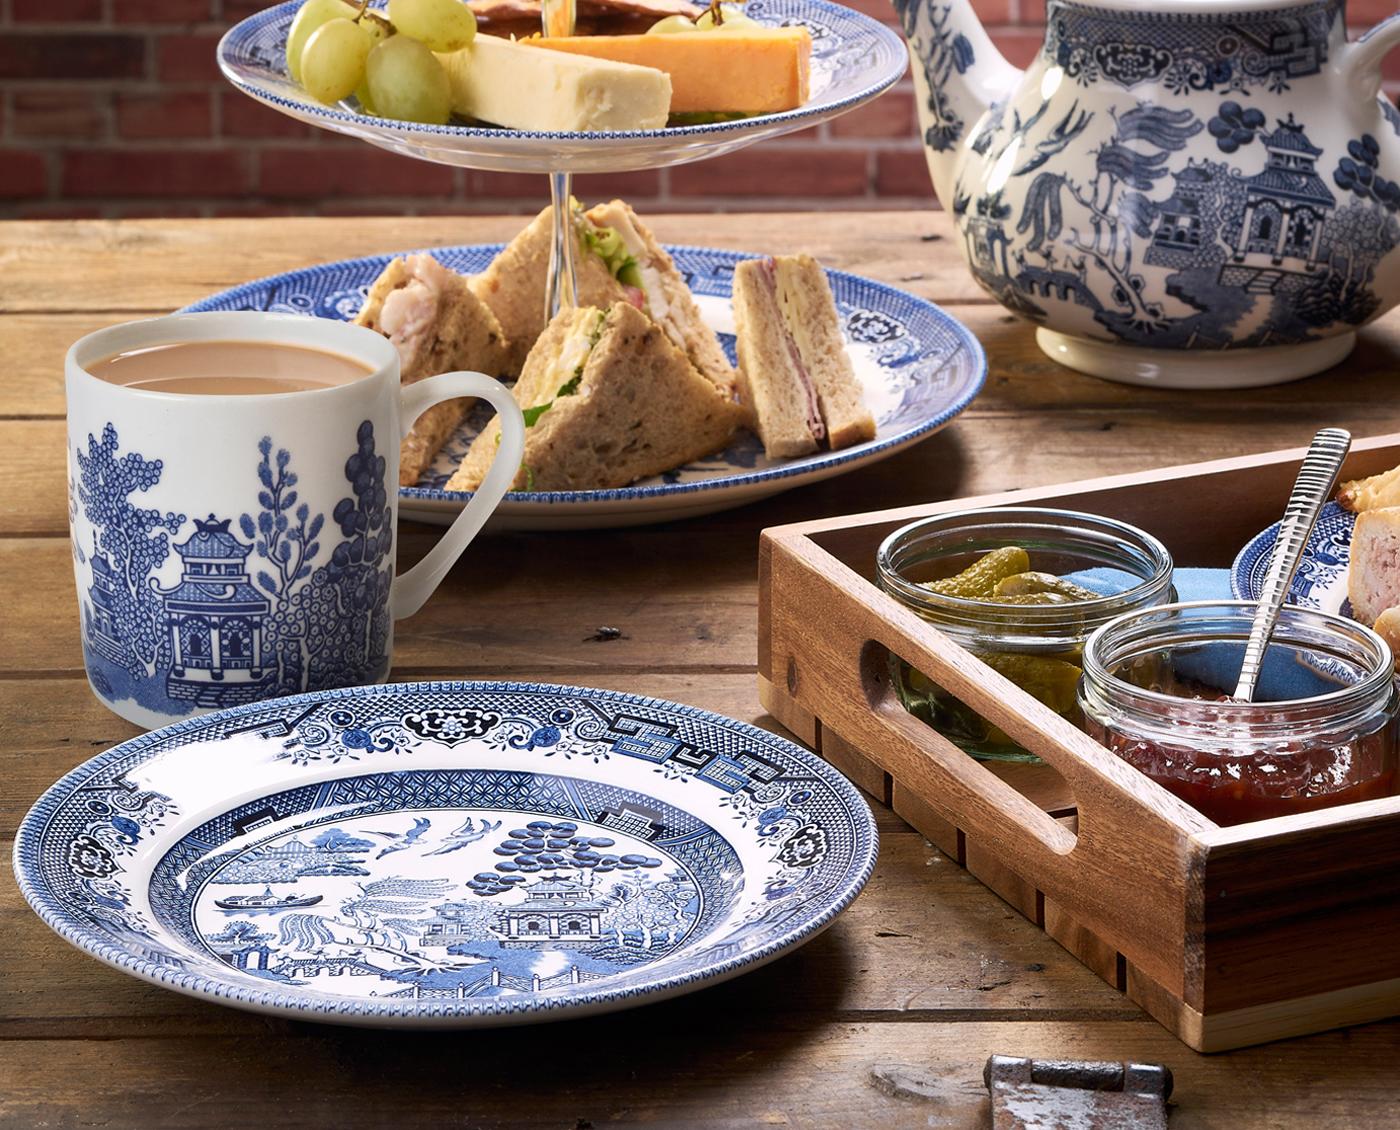 Homewares|Shop our range of tableware, Giftware, Cleaning Supplies and Much More!|SHOP NOW